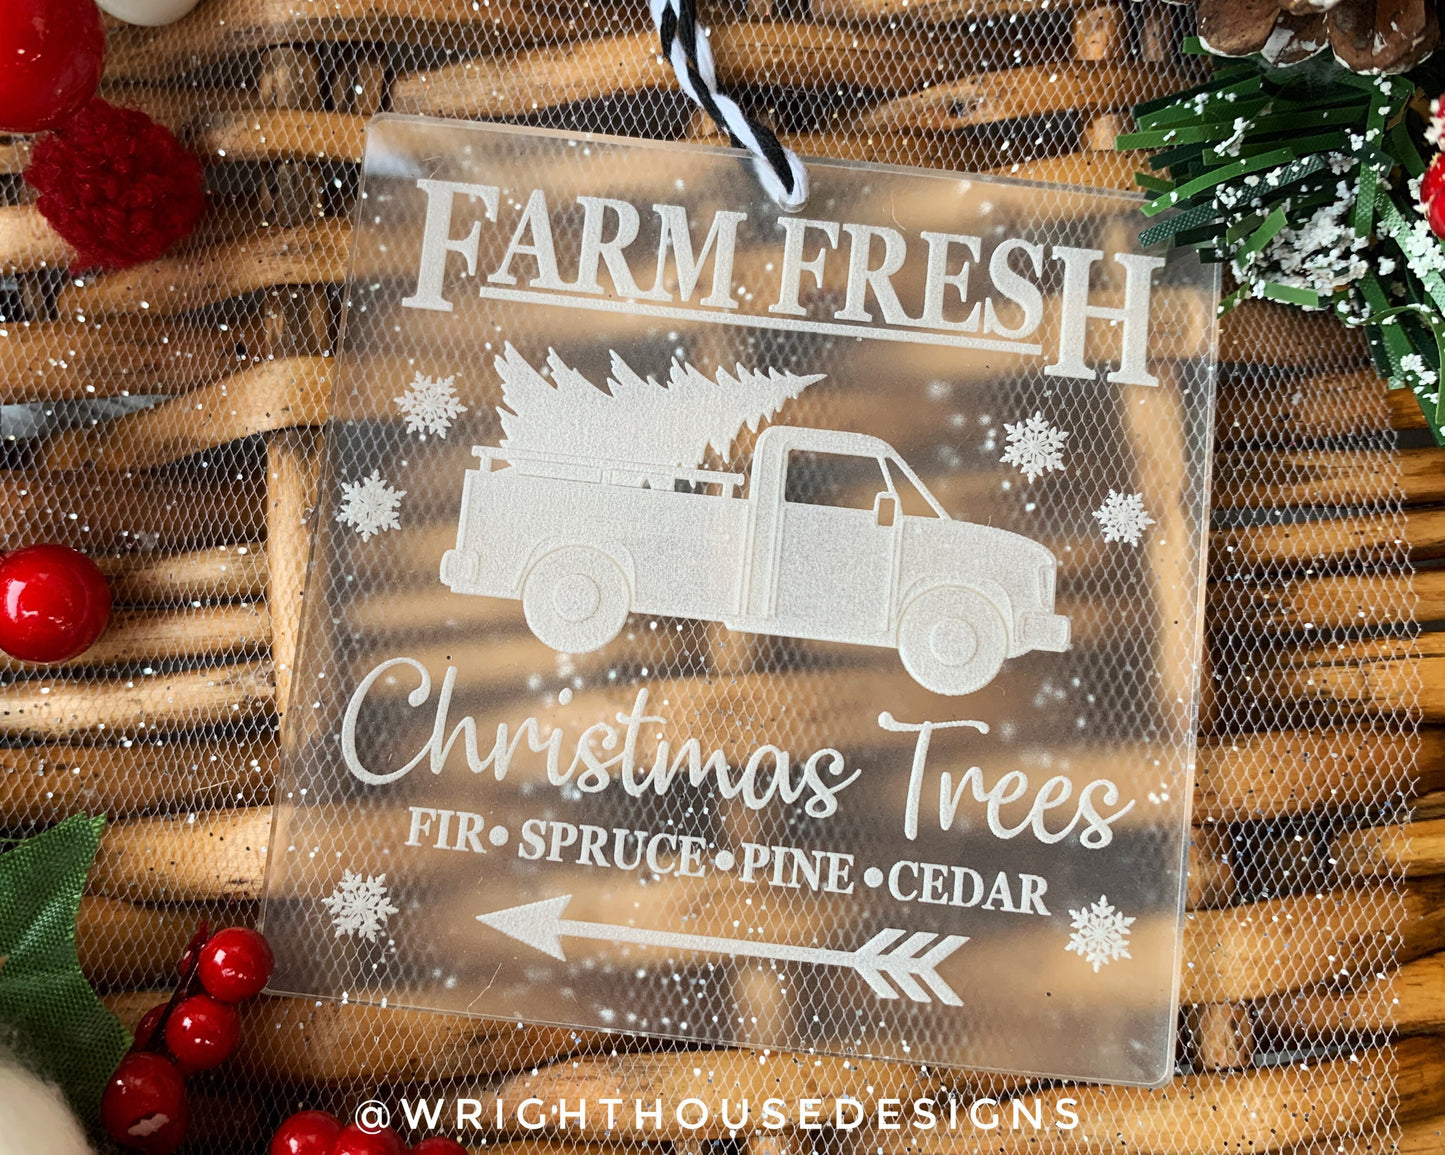 Farm Fresh Christmas Trees - Laser Engraved Frosted Acrylic - Christmas Tree Ornament